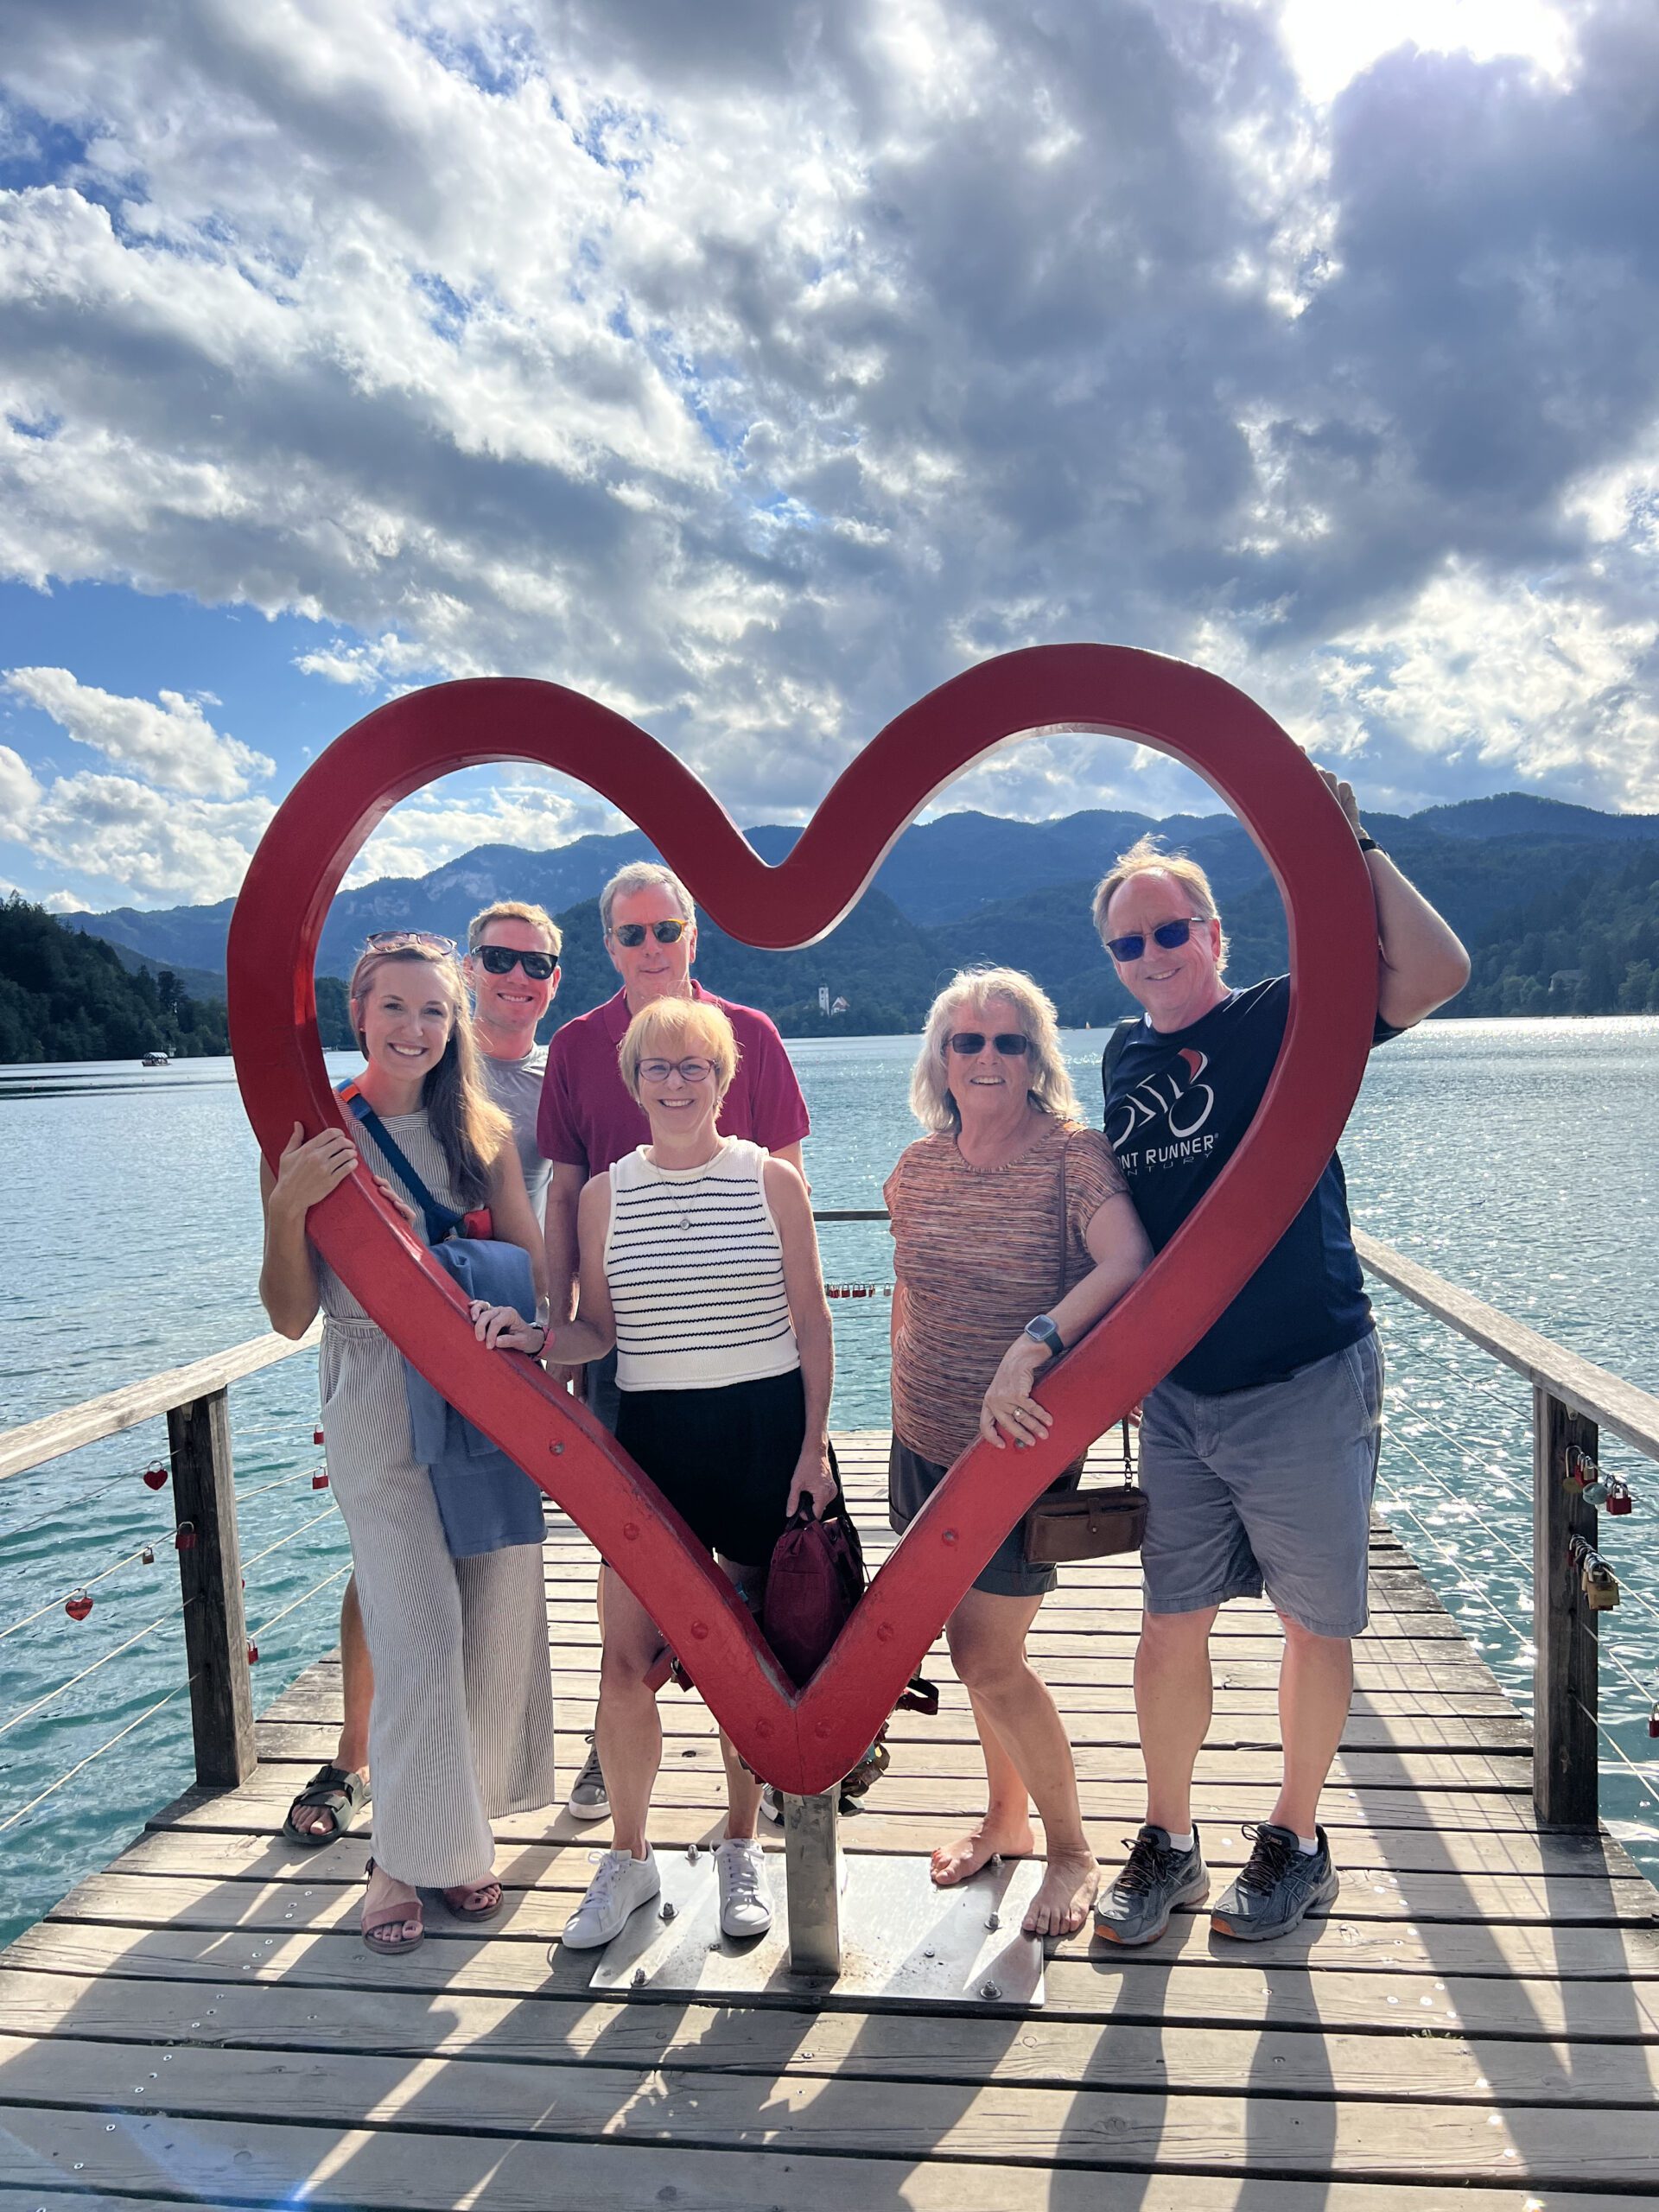 A group poses in a heart sculpture by a lake